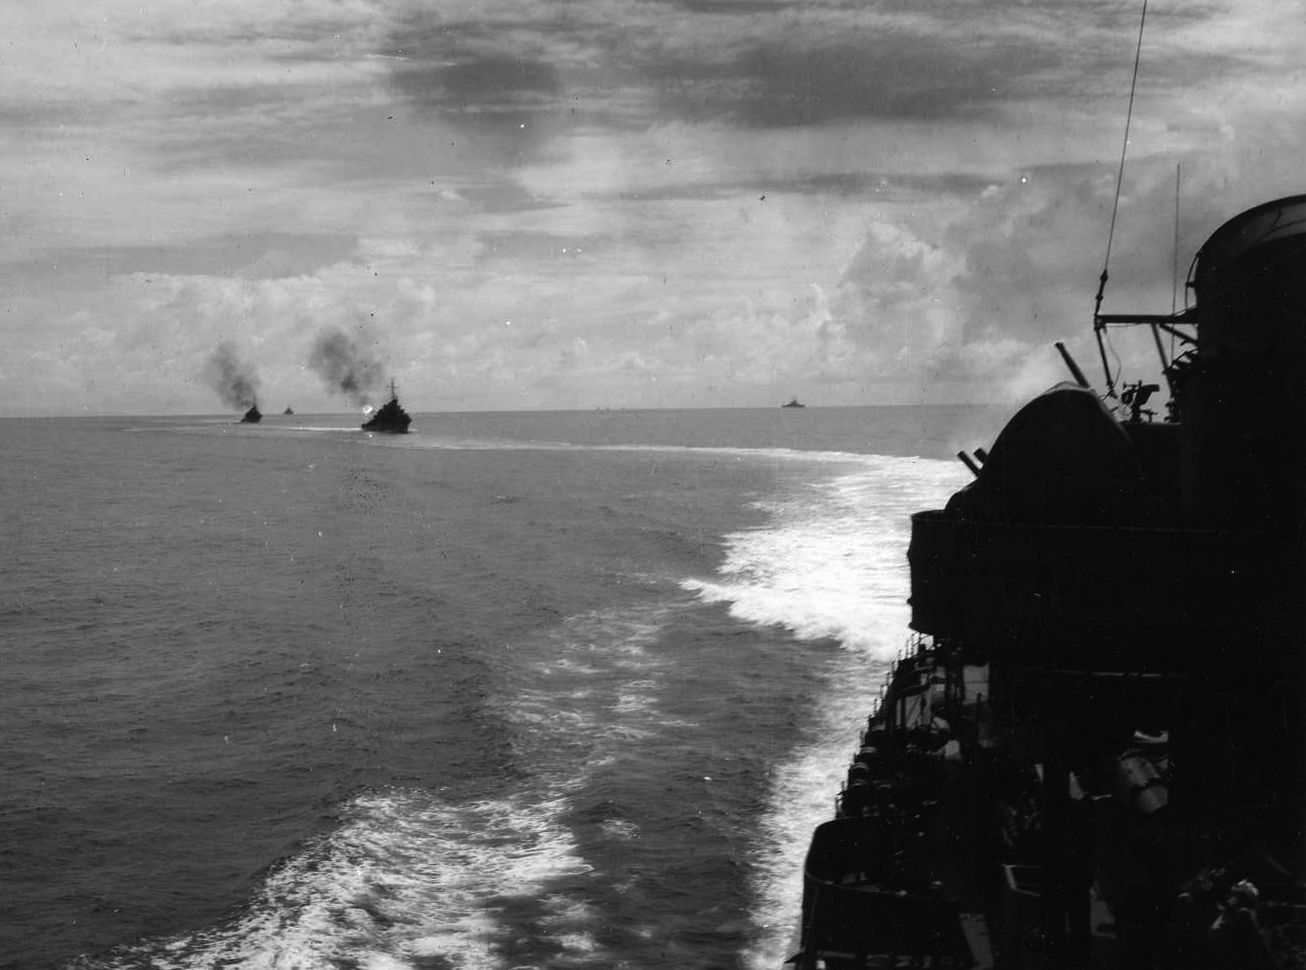 The destroyers USS Fletcher, USS O’Bannon, and USS Strong participate in gunnery exercises off the coast of the island of Espiritu Santo prior to engaging the Japanese fleet off Guadalcanal.